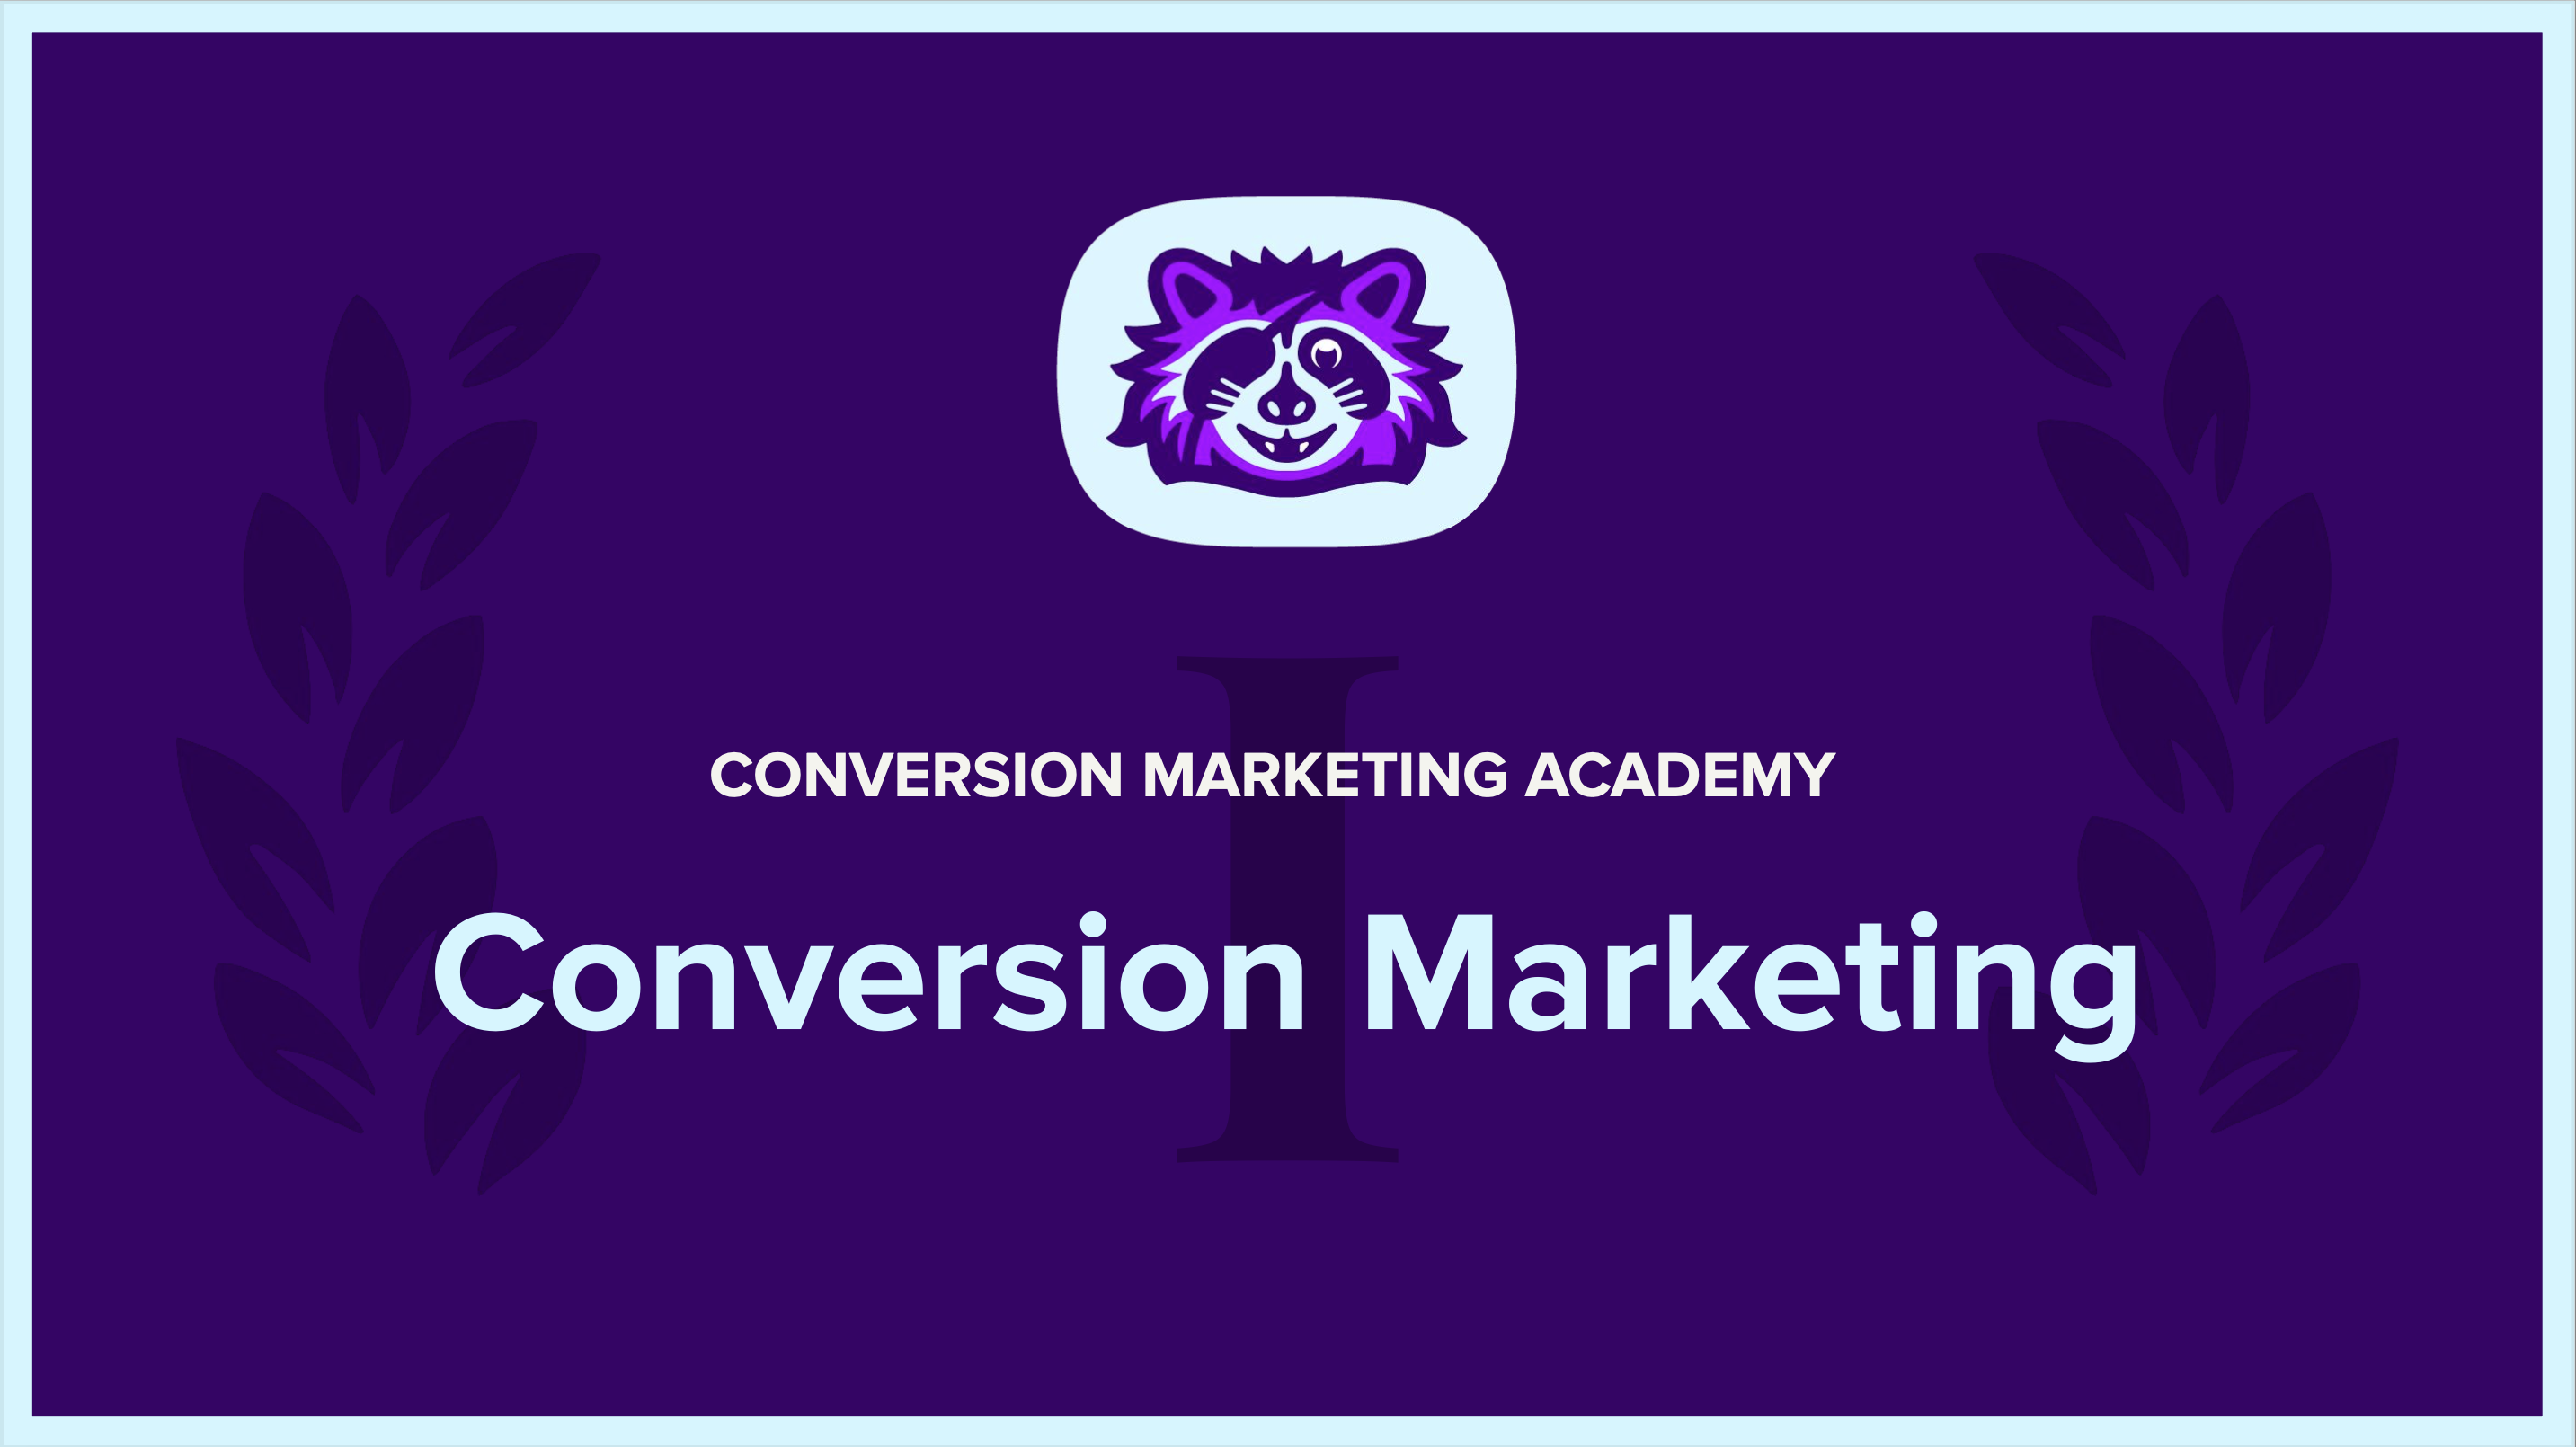 Introducing the Conversion Marketing Academy: Begin your 14-chapter masterclass